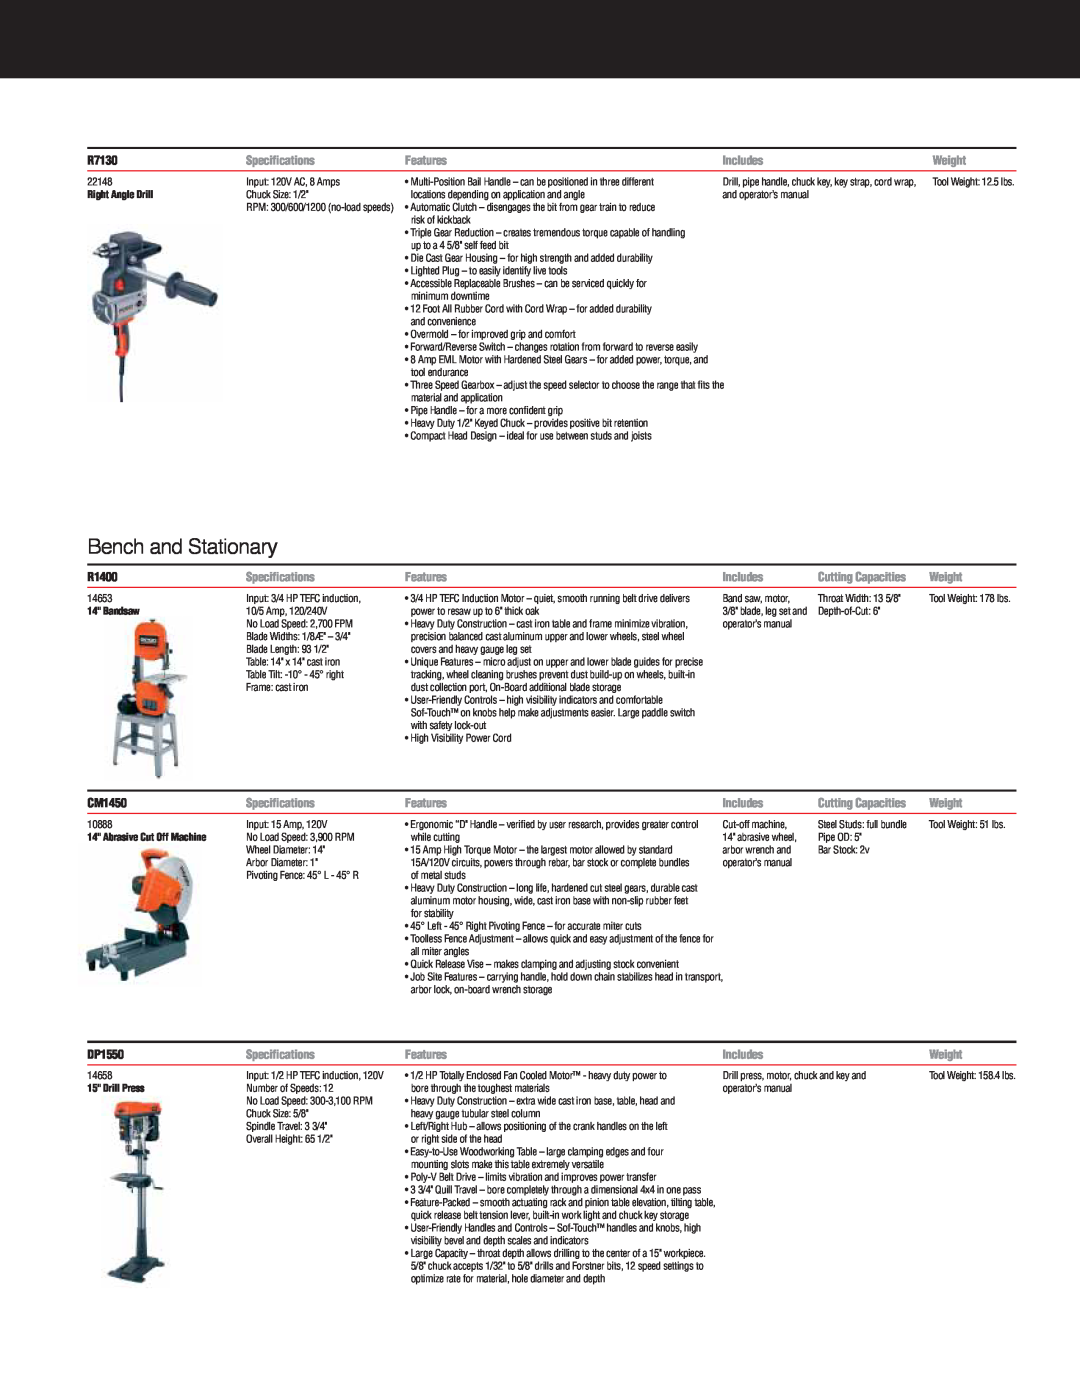 RIDGID R932, R9213 specifications Bench and Stationary, R7130, R1400, CM1450, DP1550 